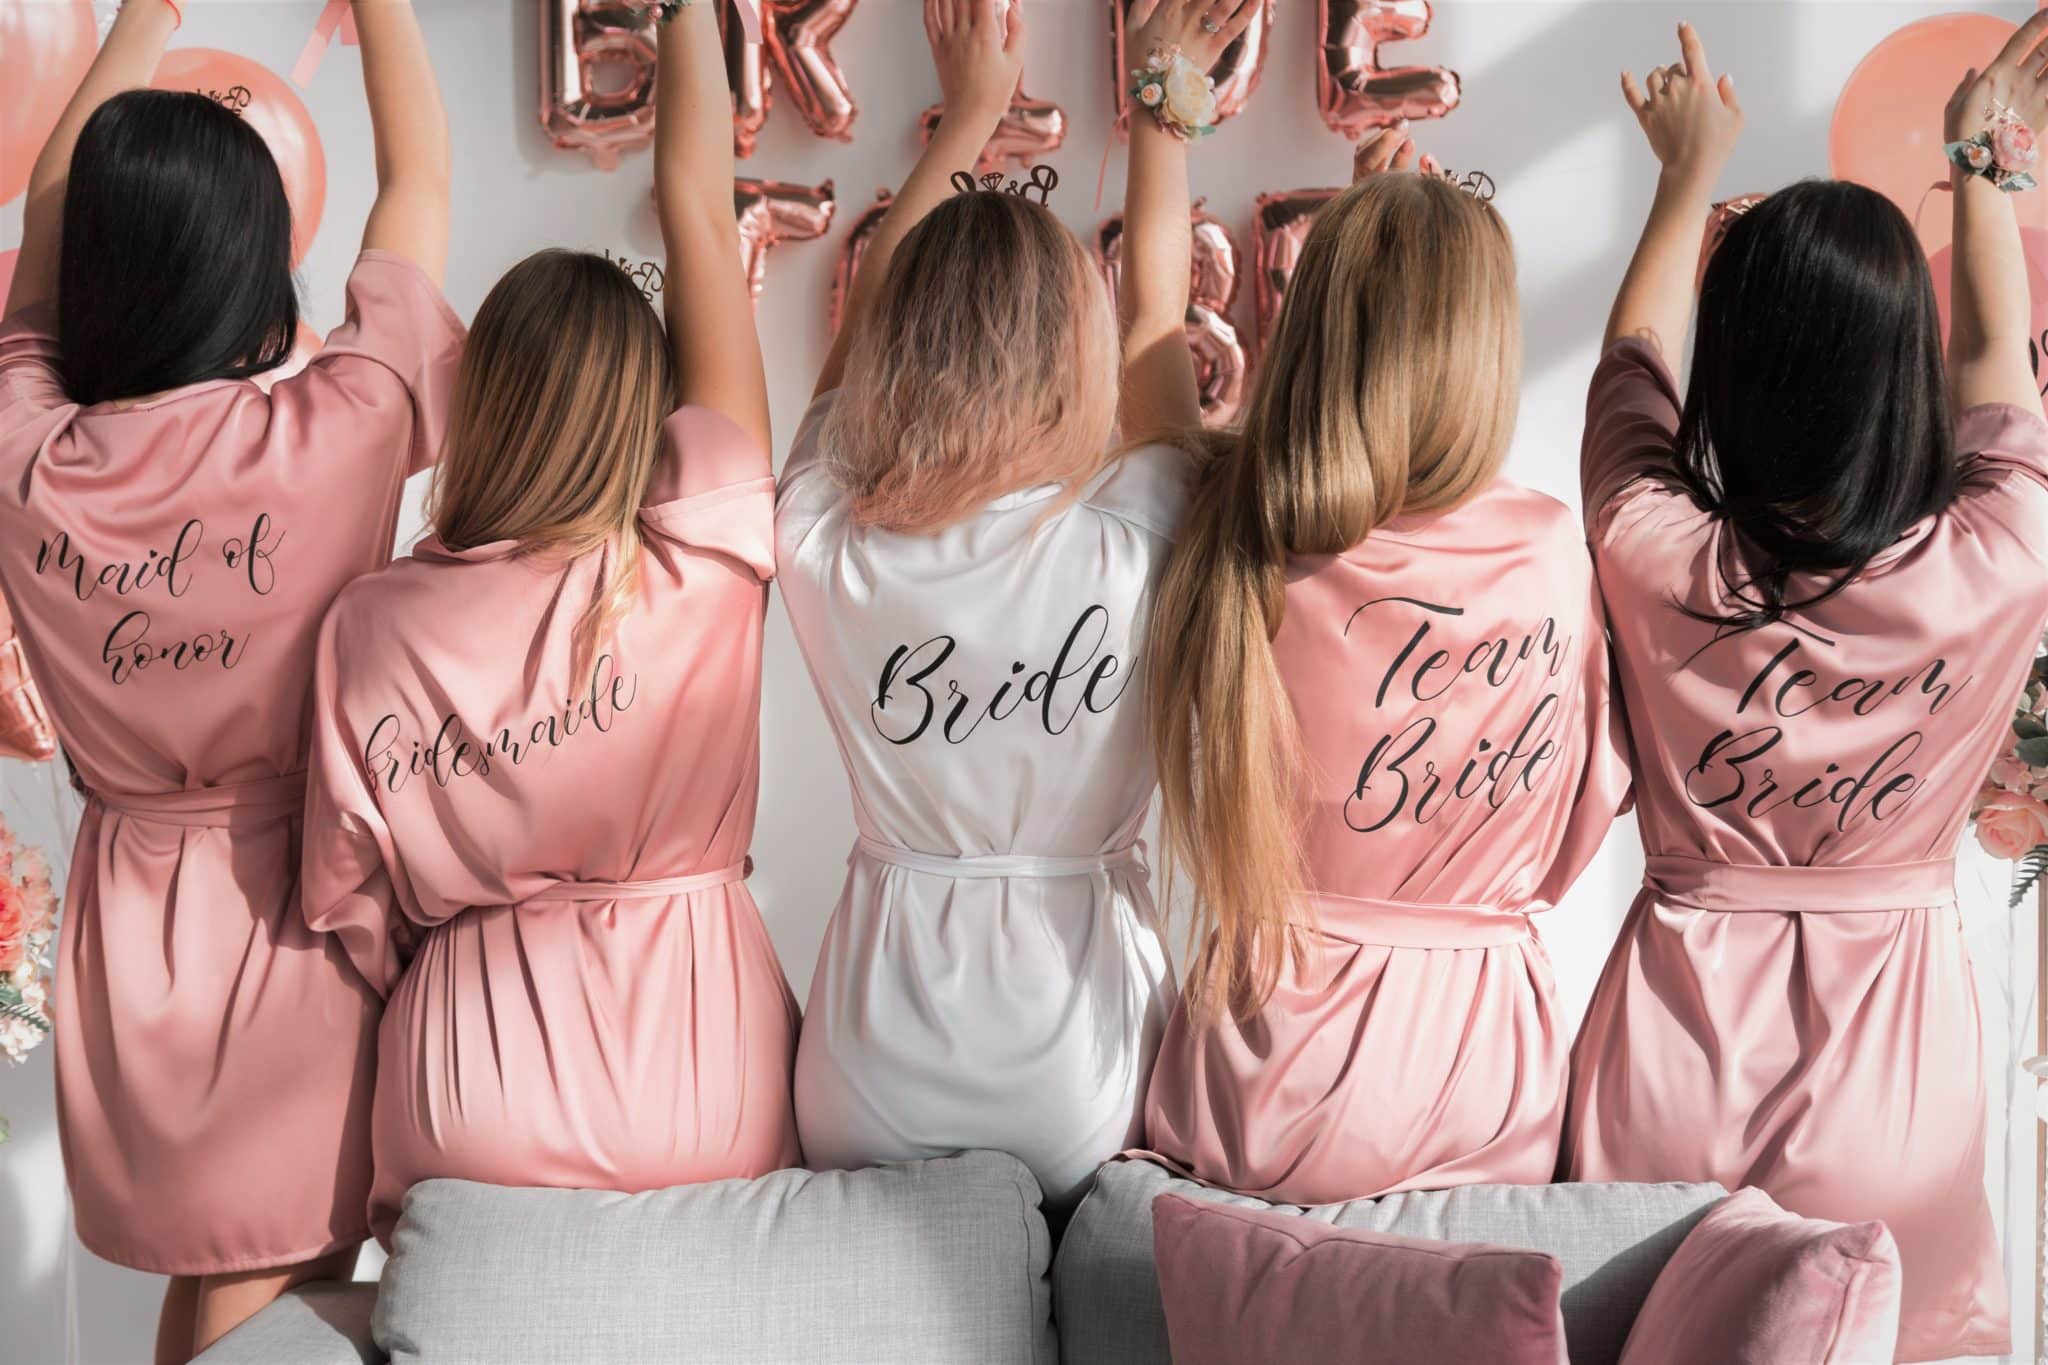 5 women at a hen party with hen party themed robes